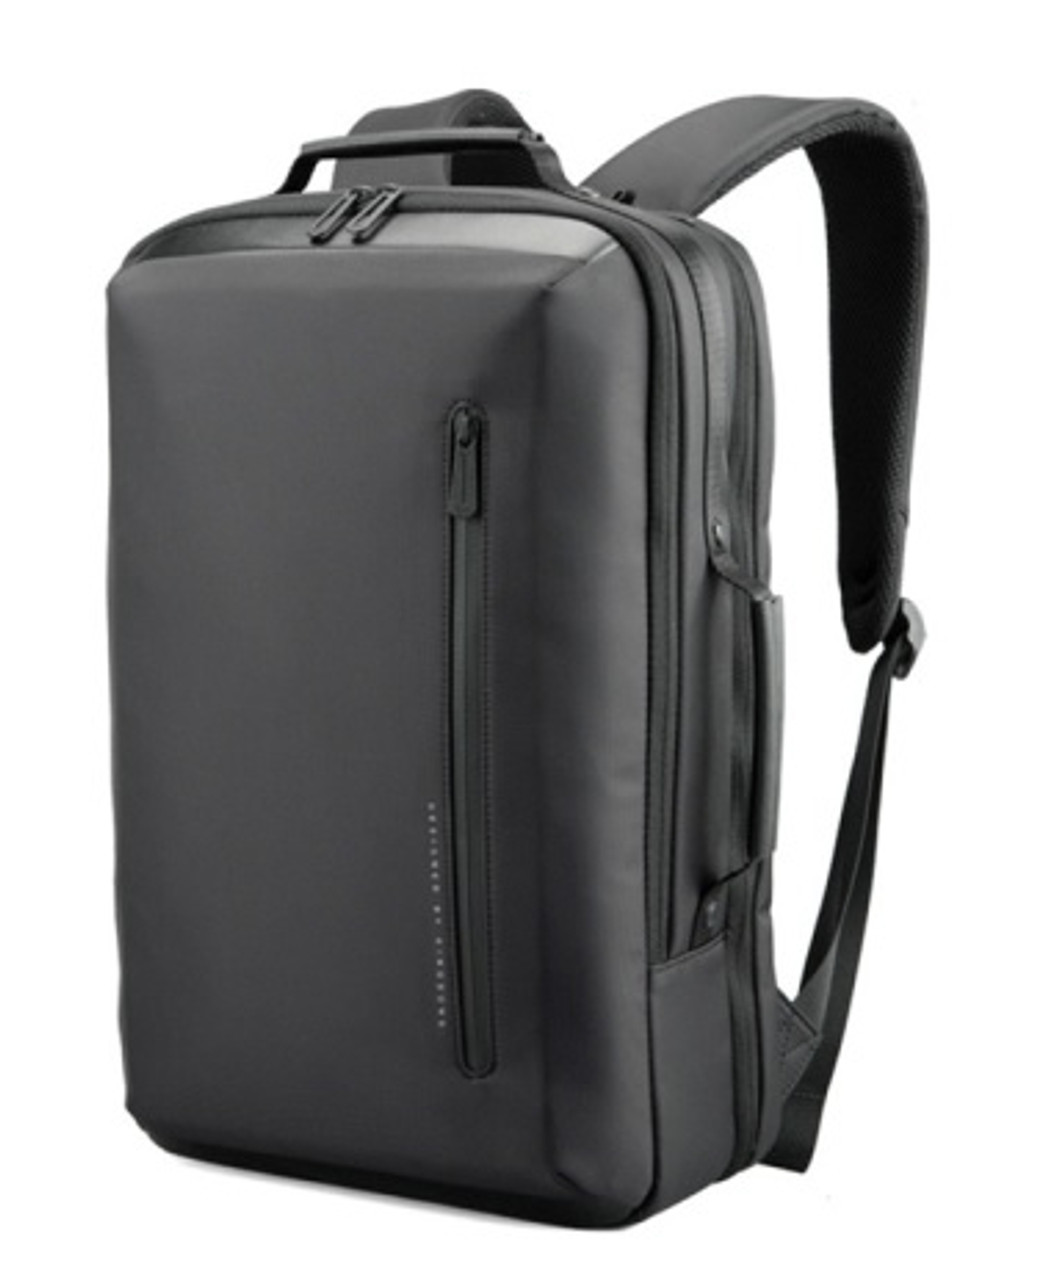 Kingsons Charged Series 15.6 Laptop Backpack